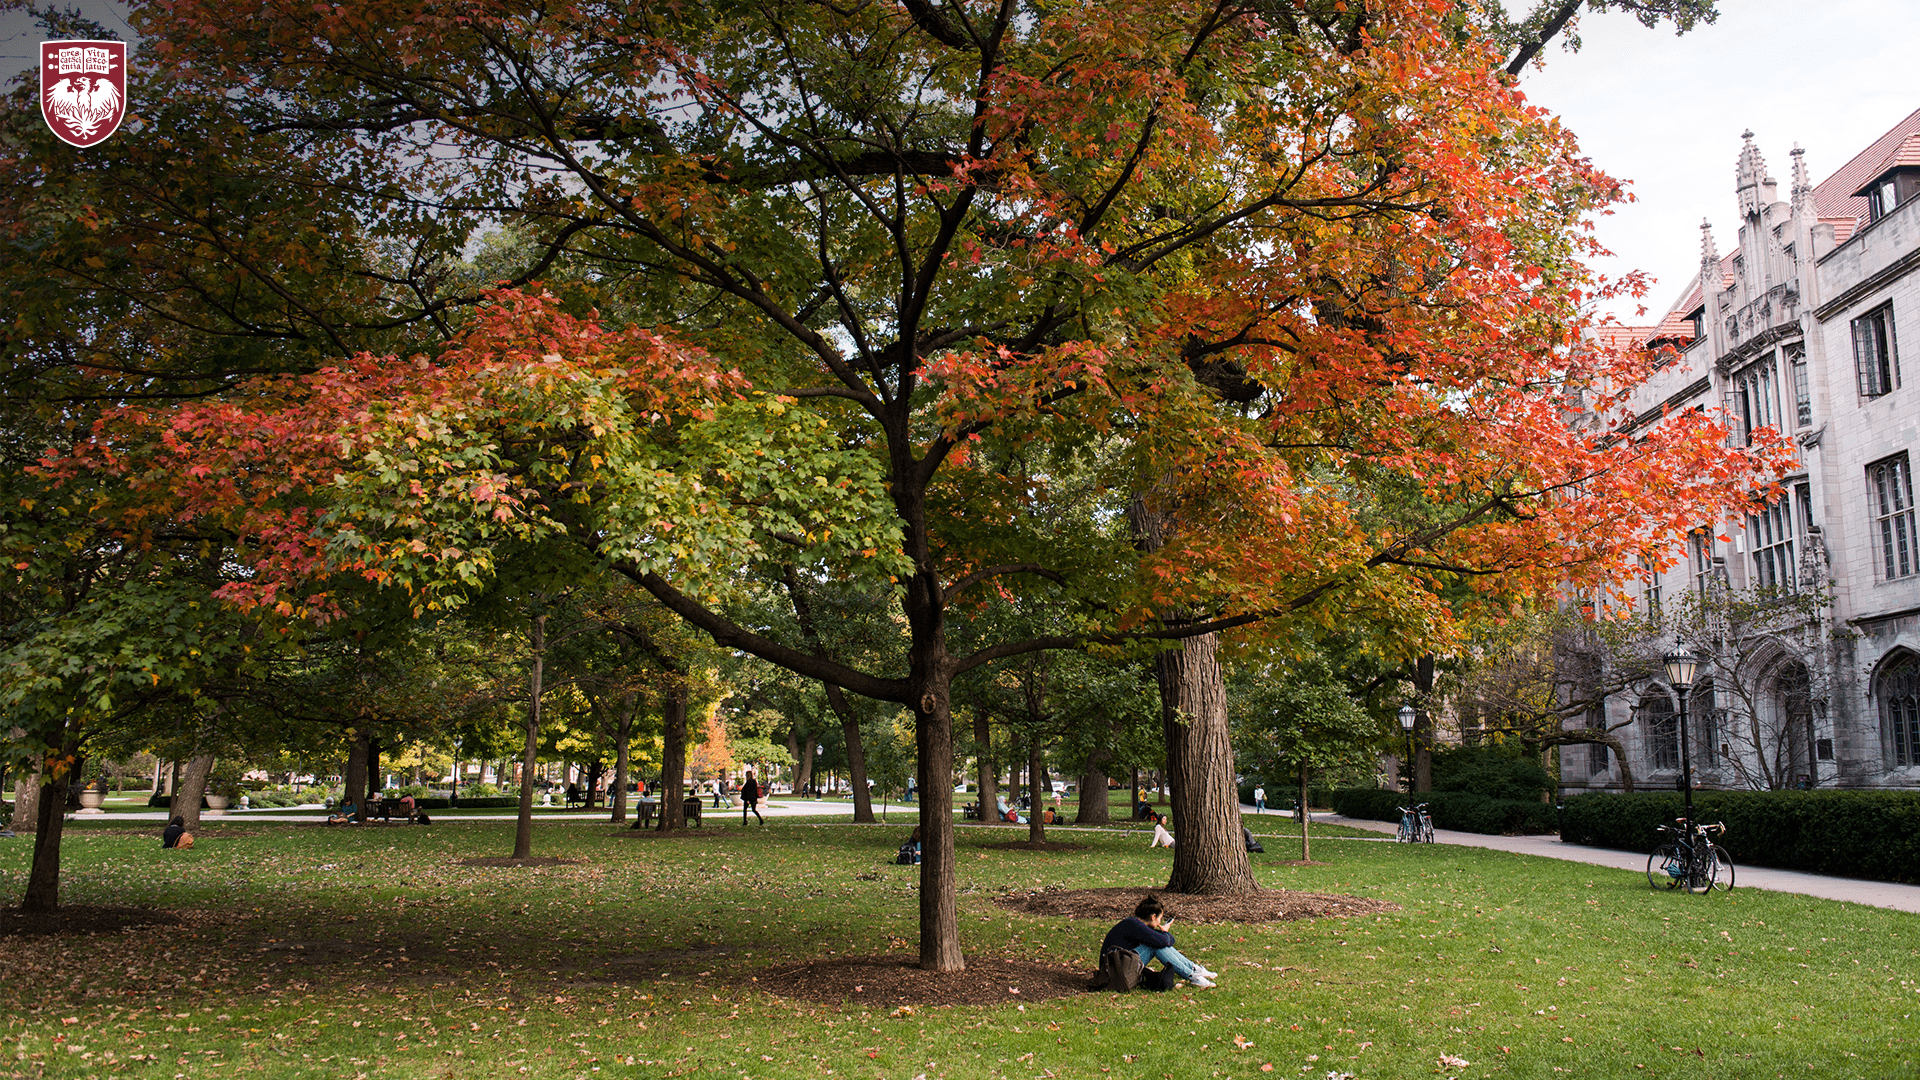 Person sitting on the grass underneath a tree with leaves changing from green to red